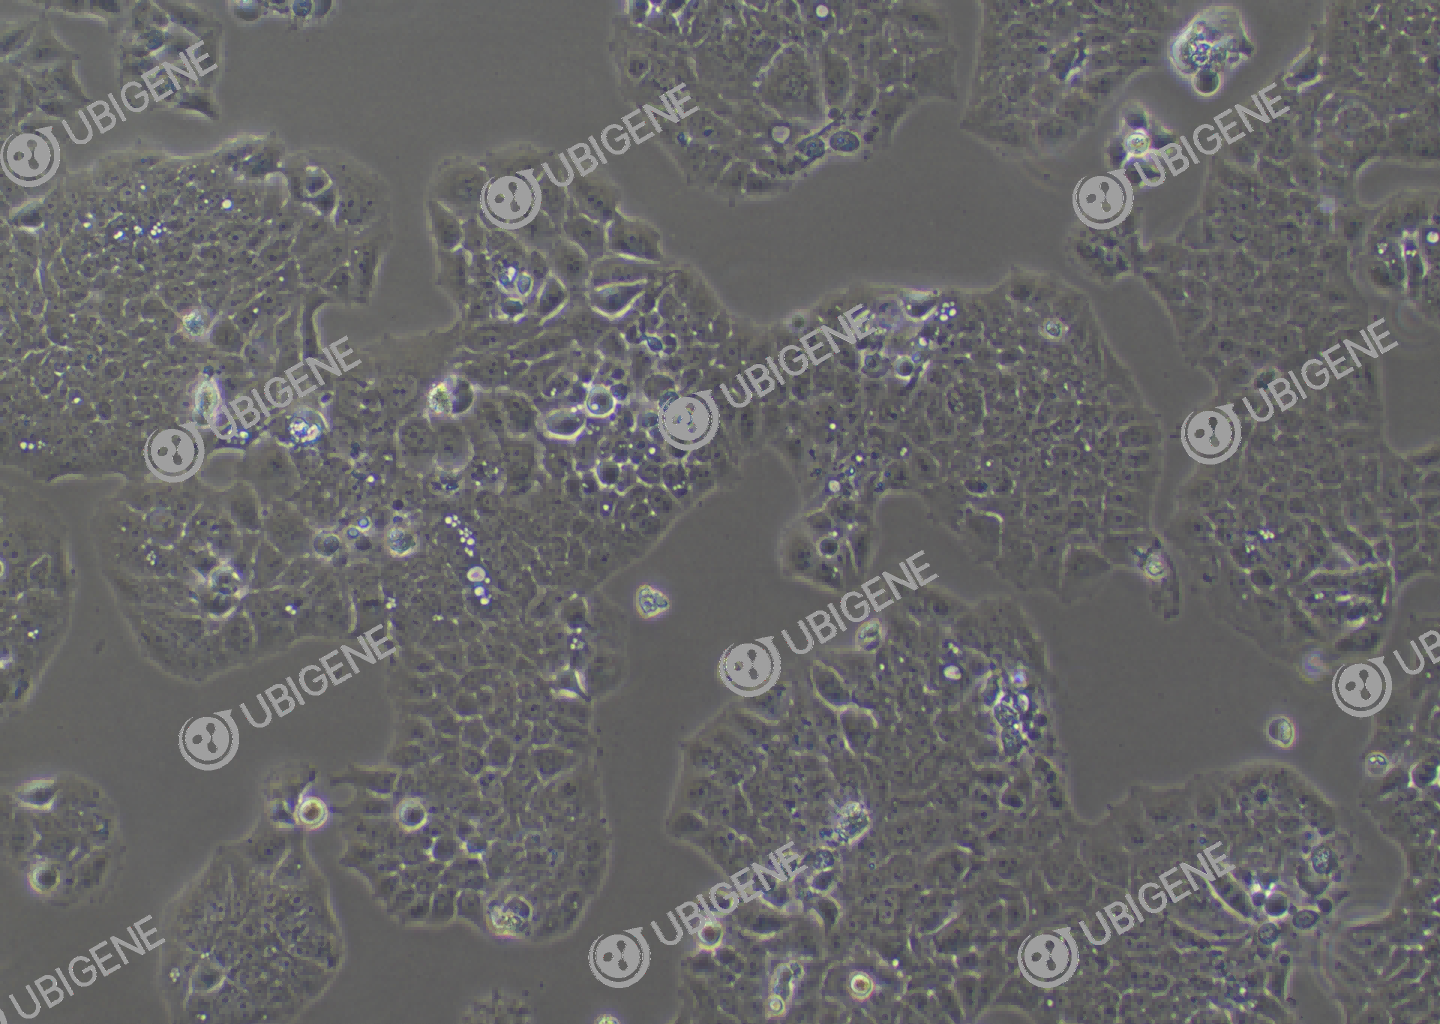 MS751 cell line Cultured cell morphology